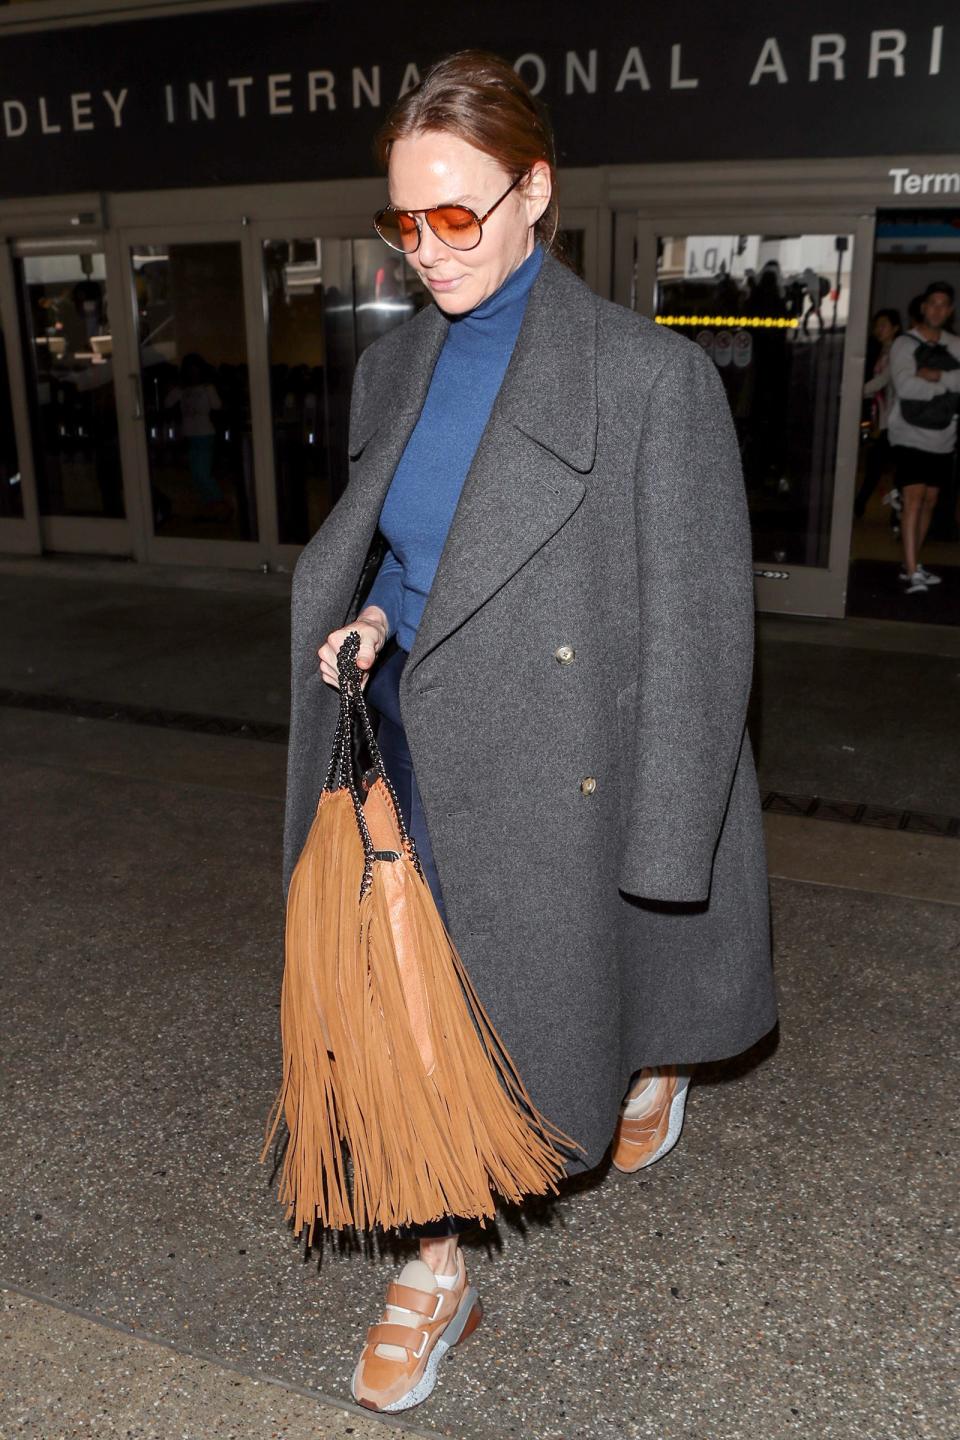 No need for an airplane blanket with a souped-up overcoat and turtleneck.